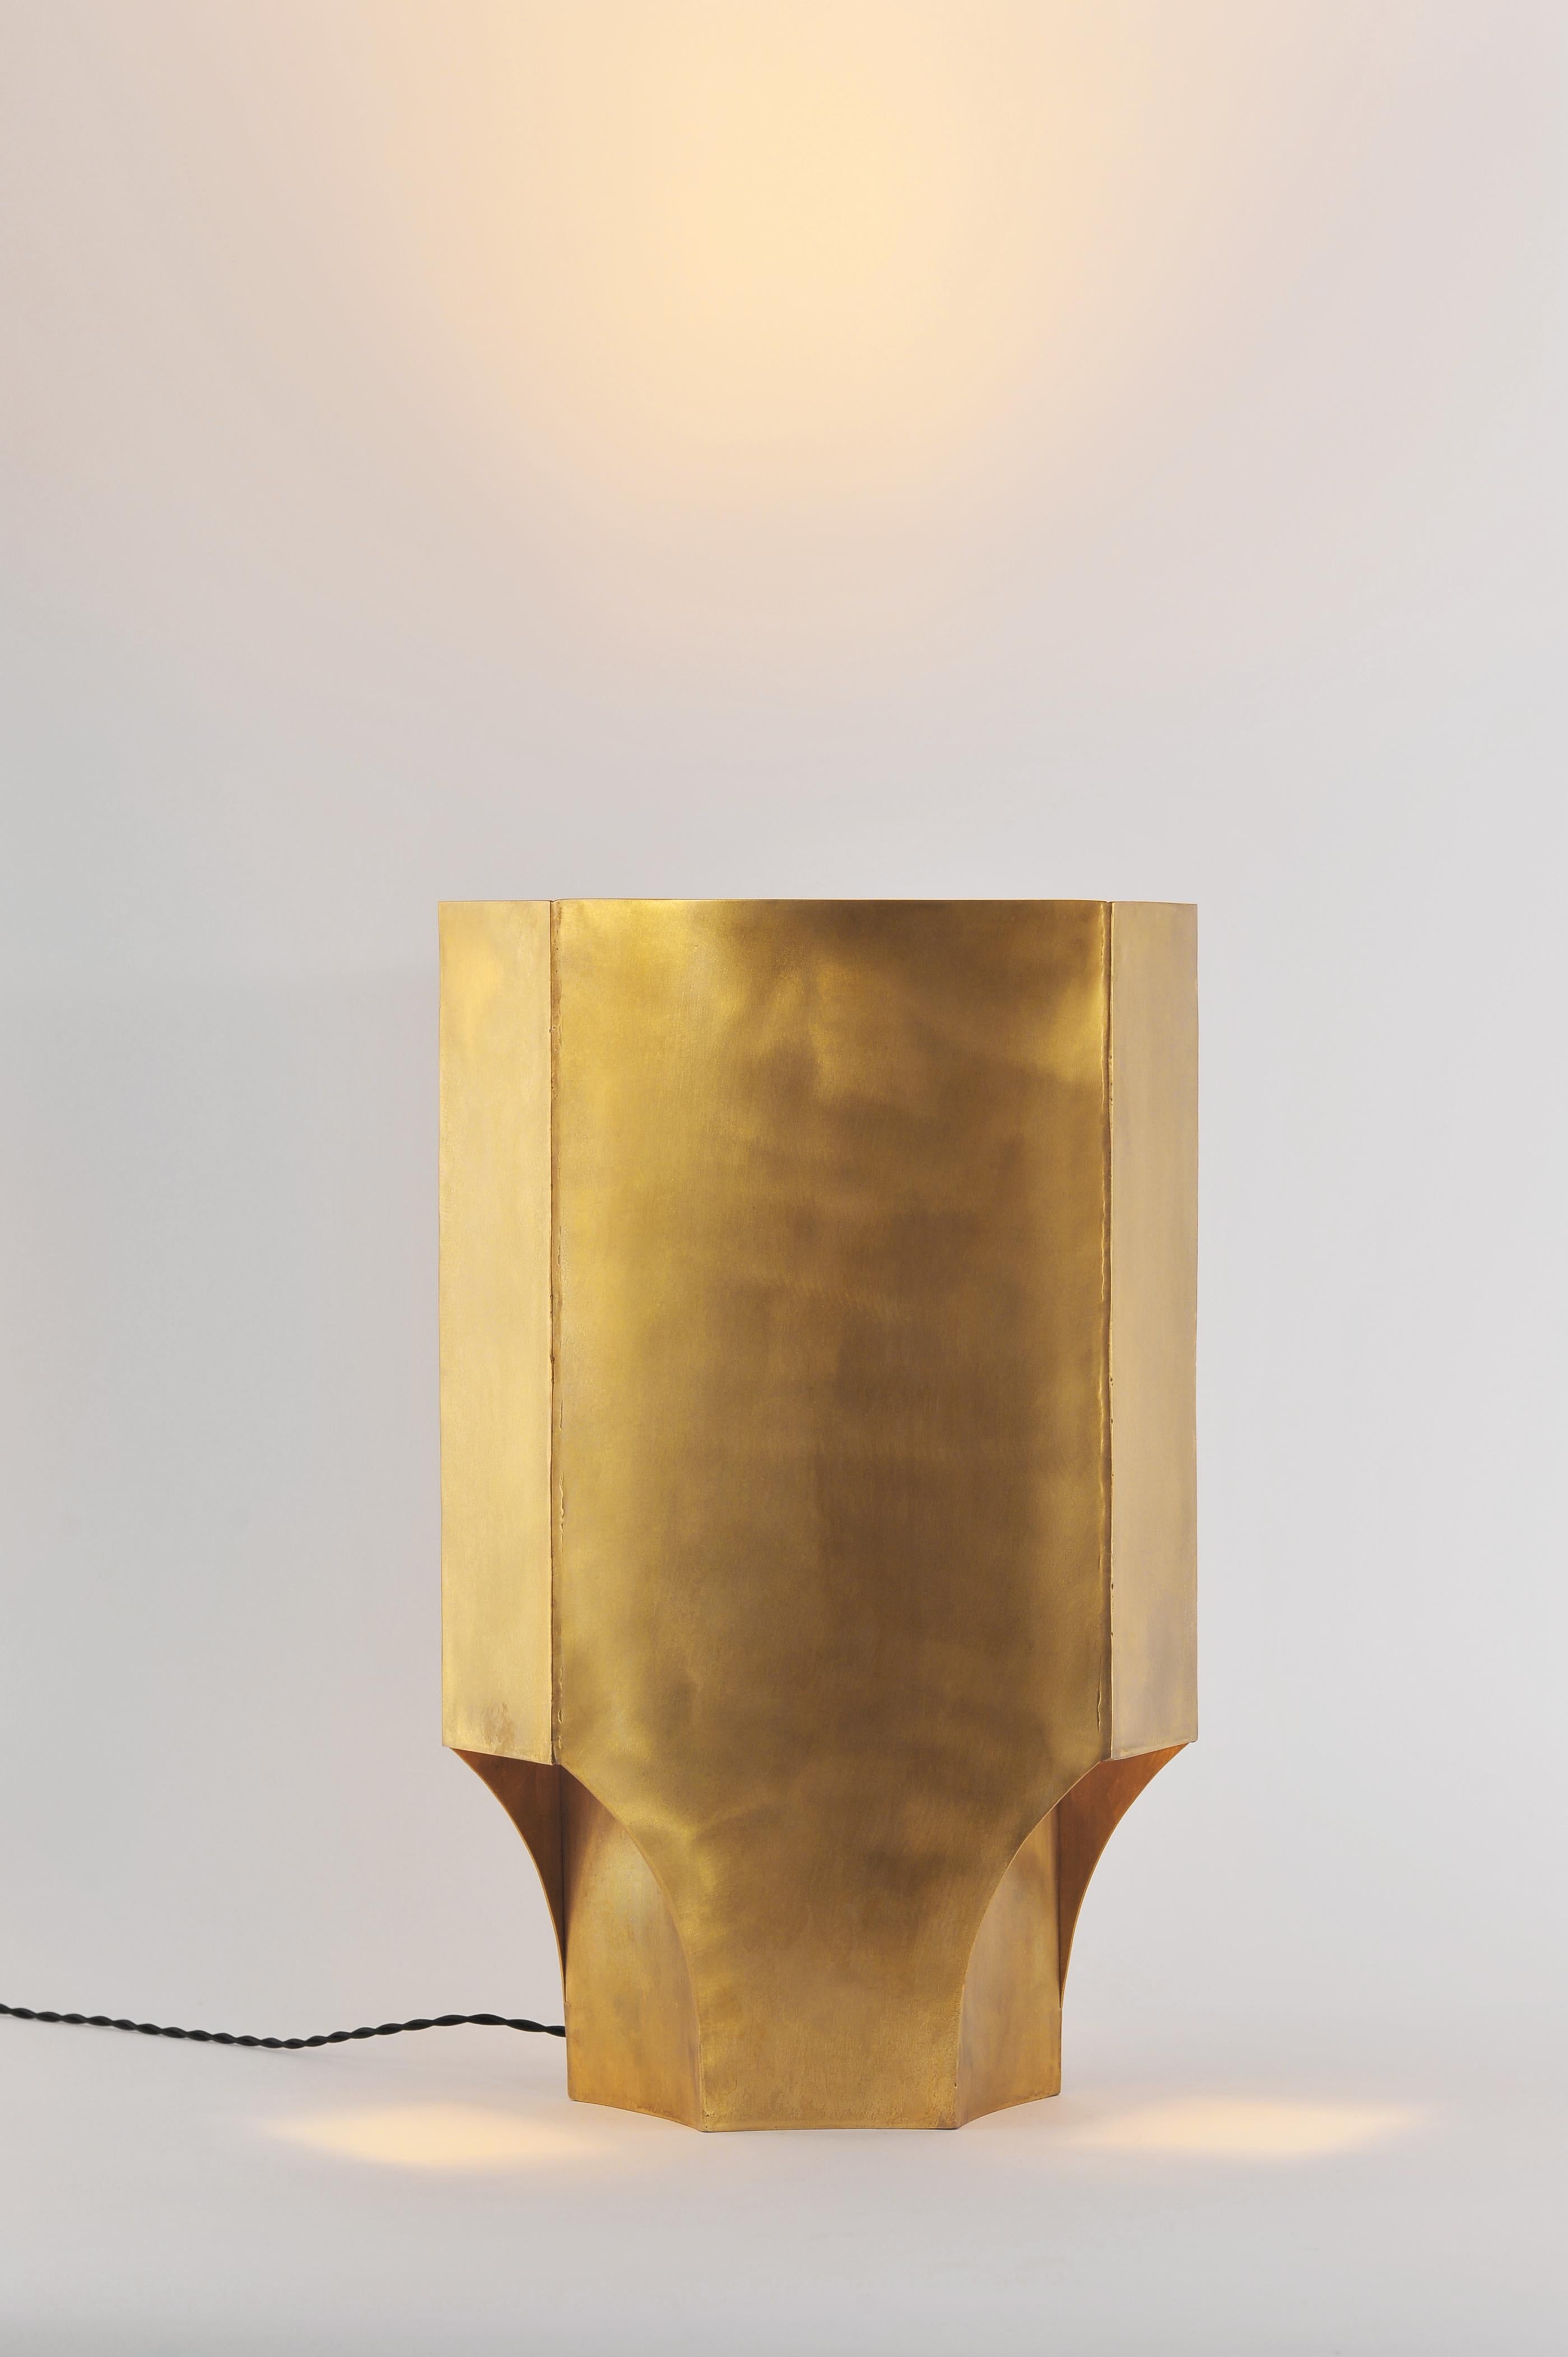 Brutalist table lamp by Lukasz Friedrich
Dimensions: 30 x 30 H 50 cm
Materials: Patinated Brass

All our lamps can be wired according to each country. If sold to the USA it will be wired for the USA for instance.

Lukasz Friedrich (born 1980),